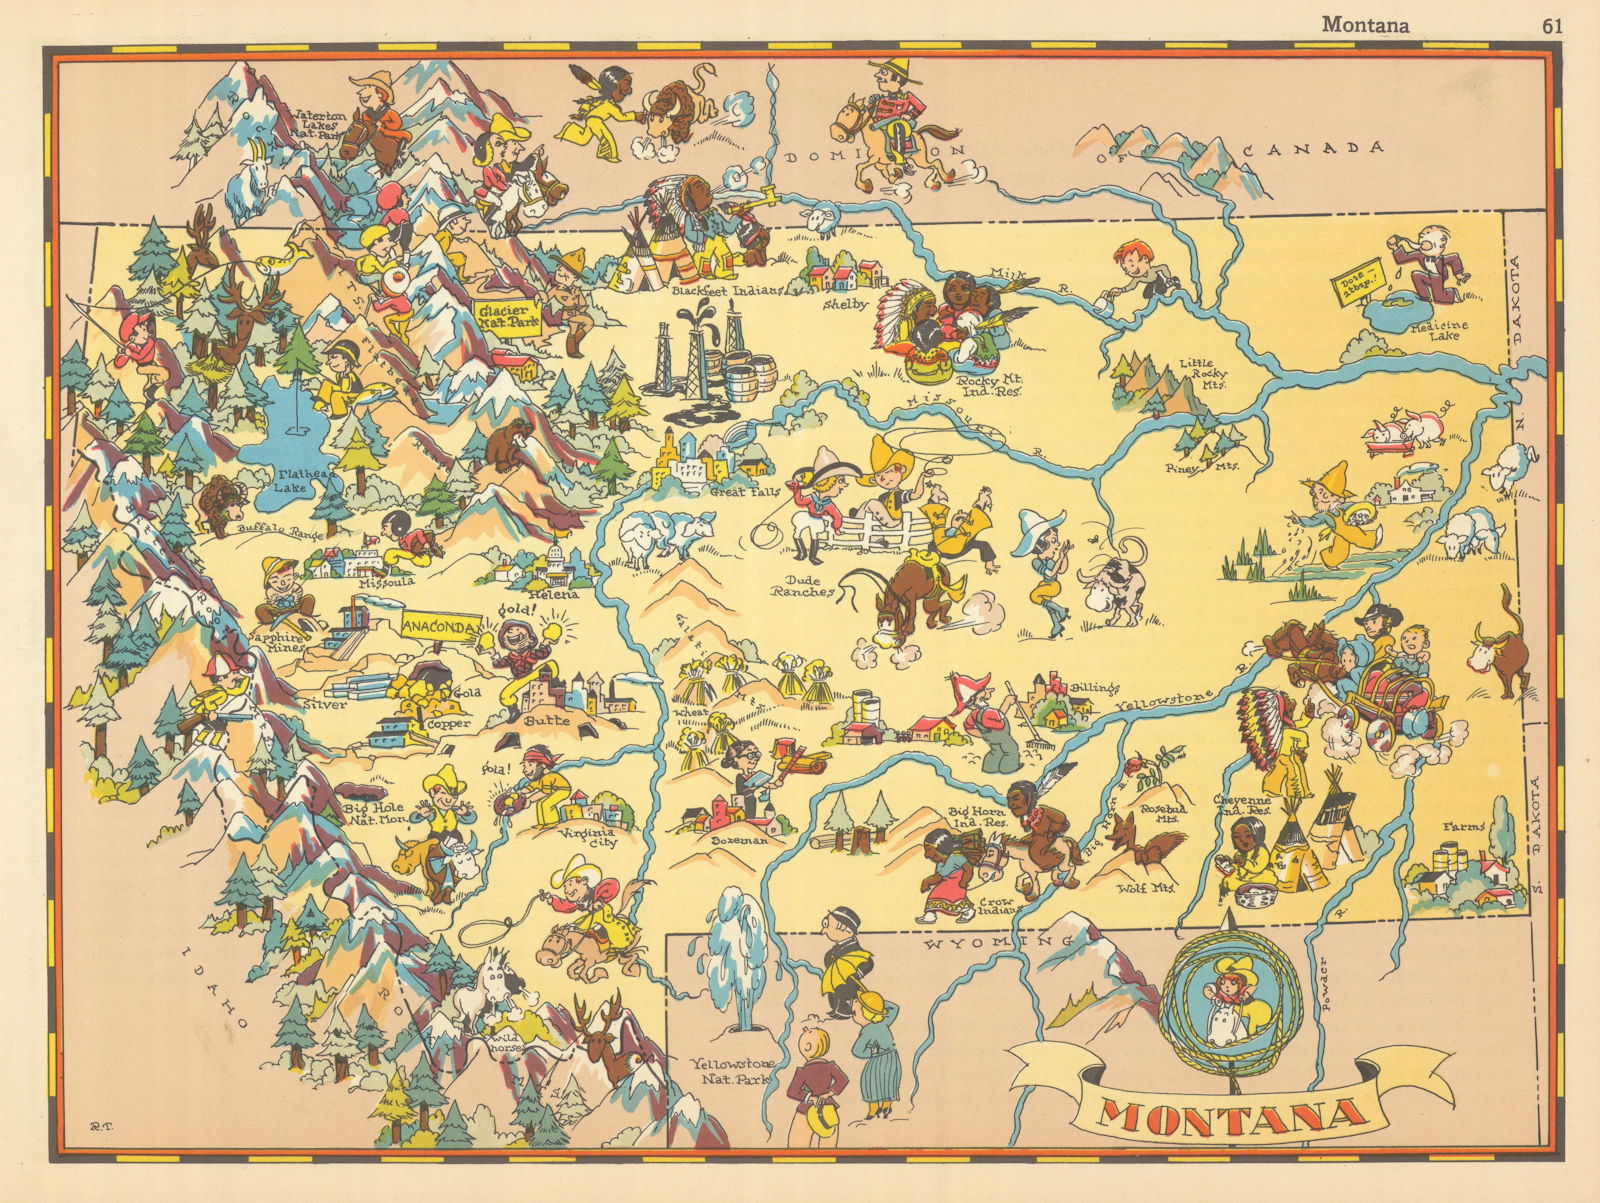 Montana. Pictorial state map by Ruth Taylor White 1935 old vintage chart